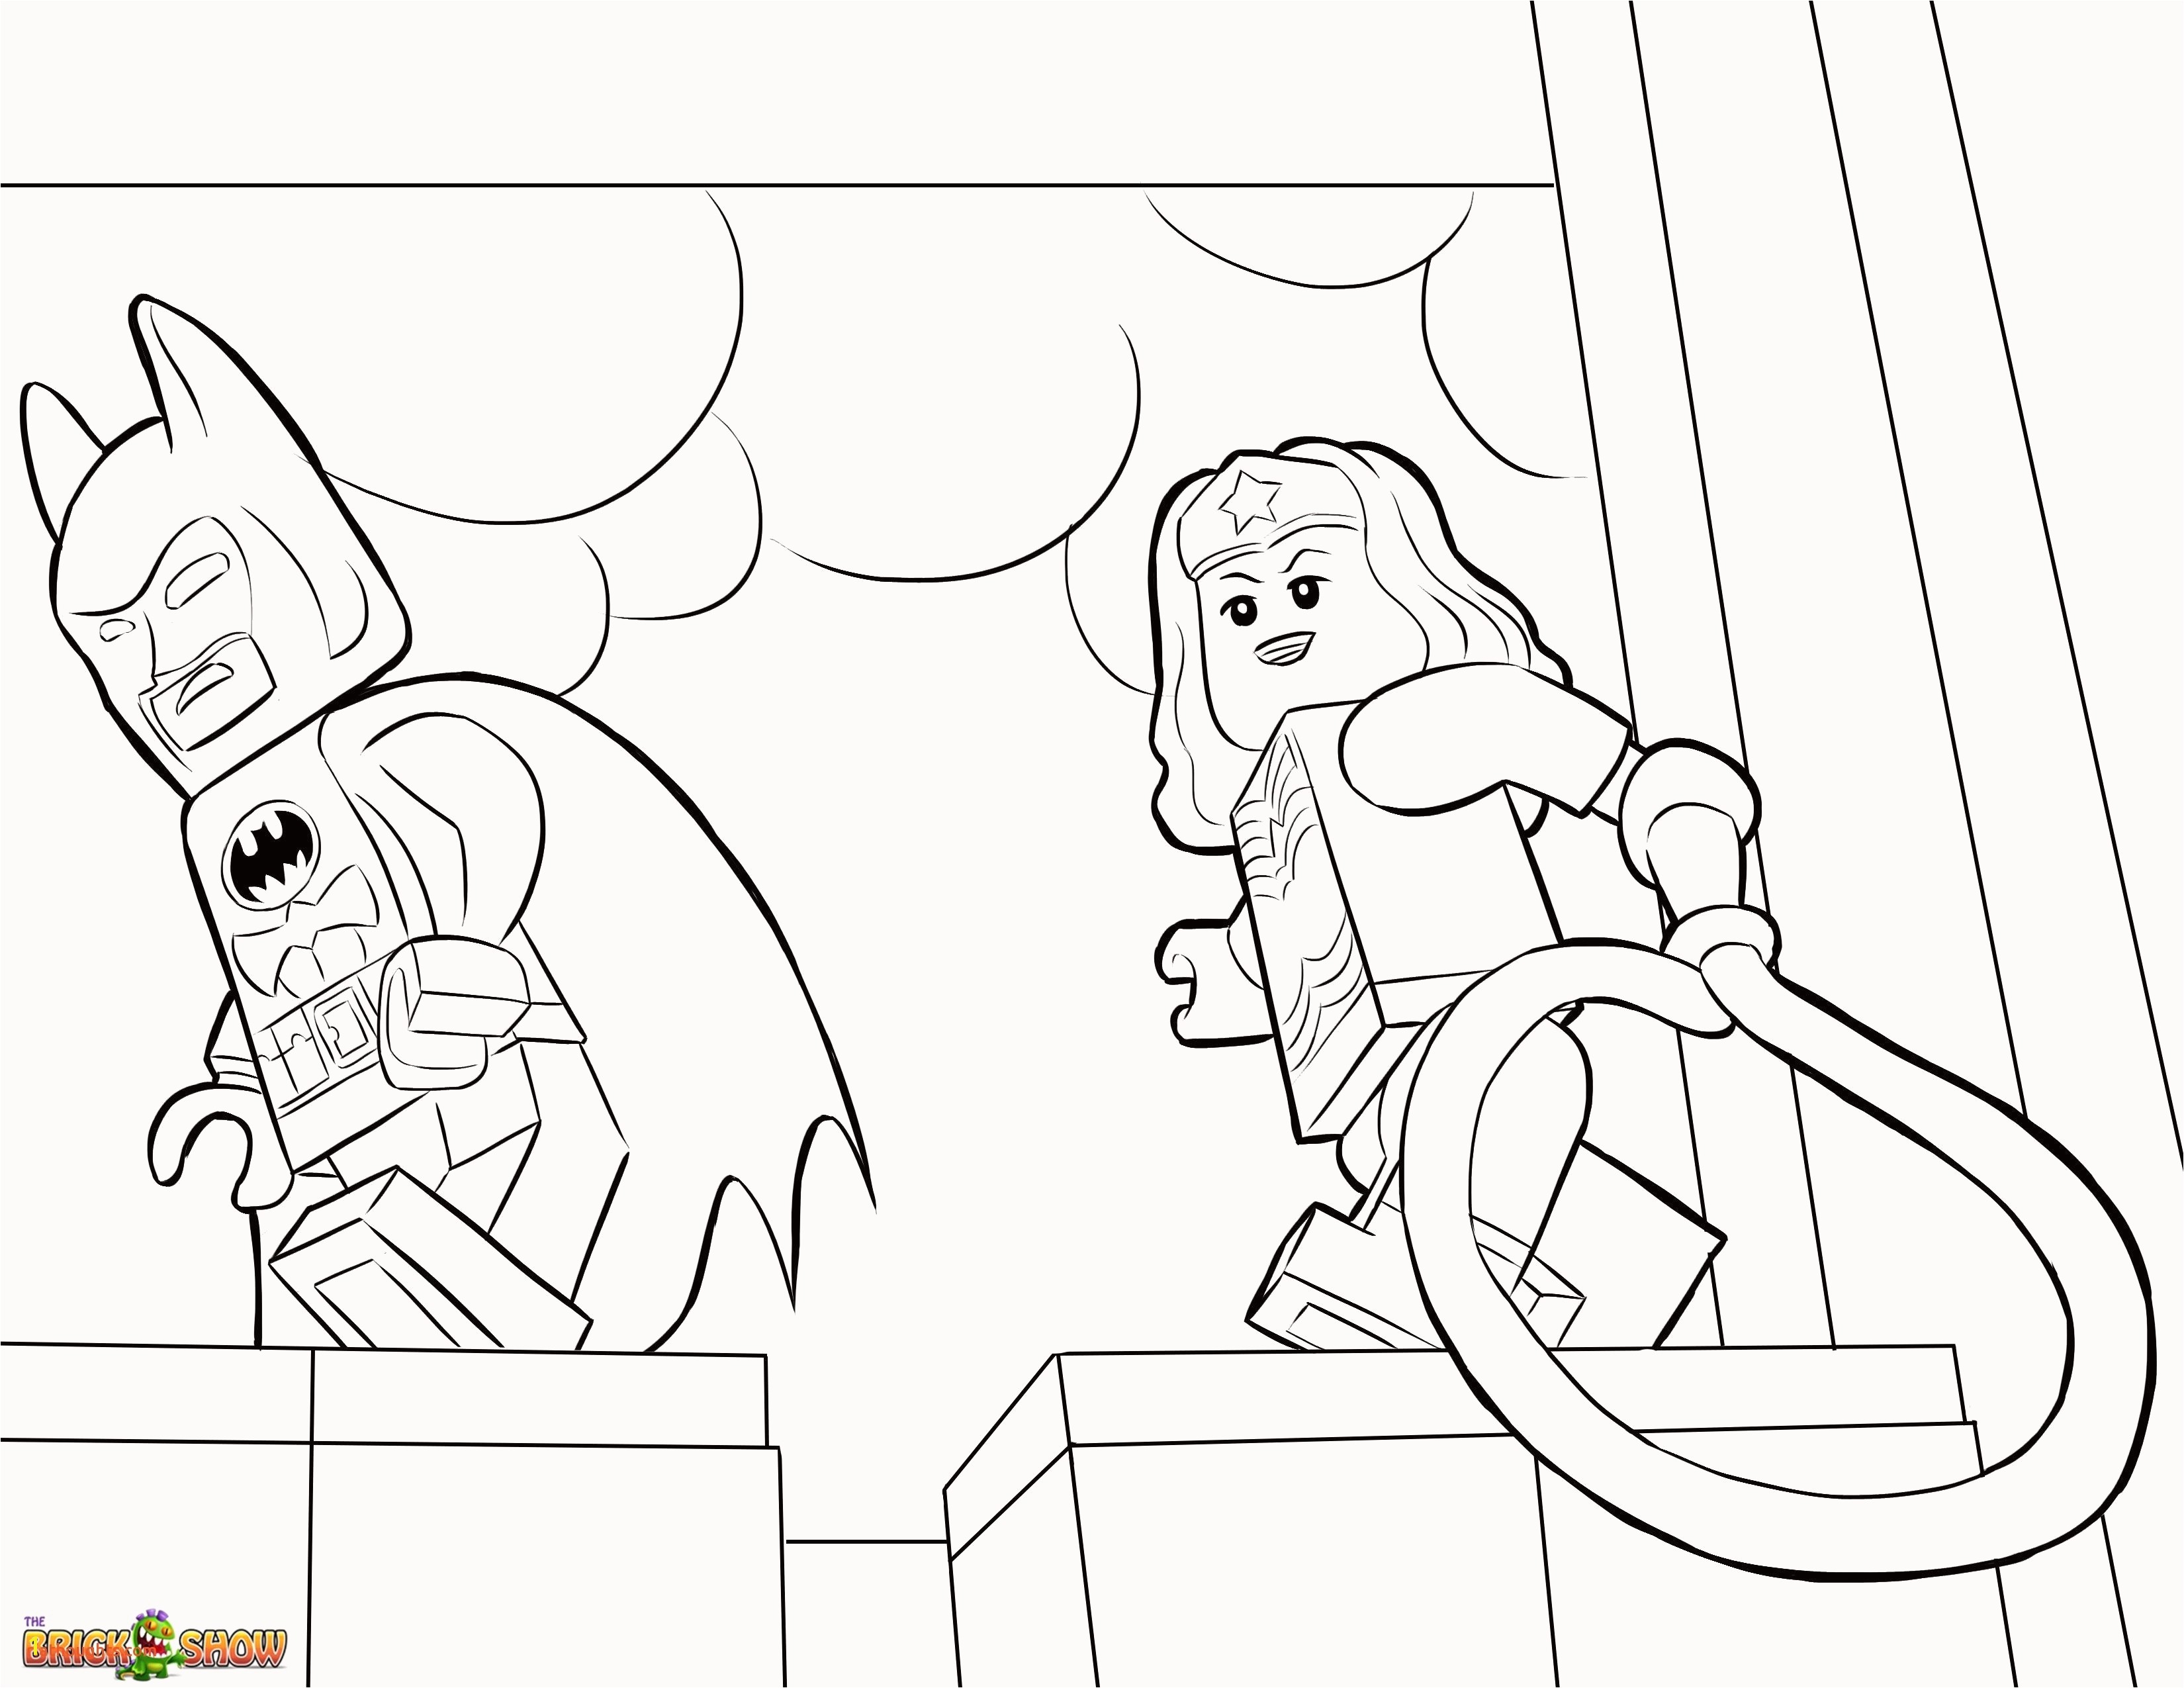 Superhero Logos Coloring Pages 30 Lovely Superhero Symbols Coloring Pages